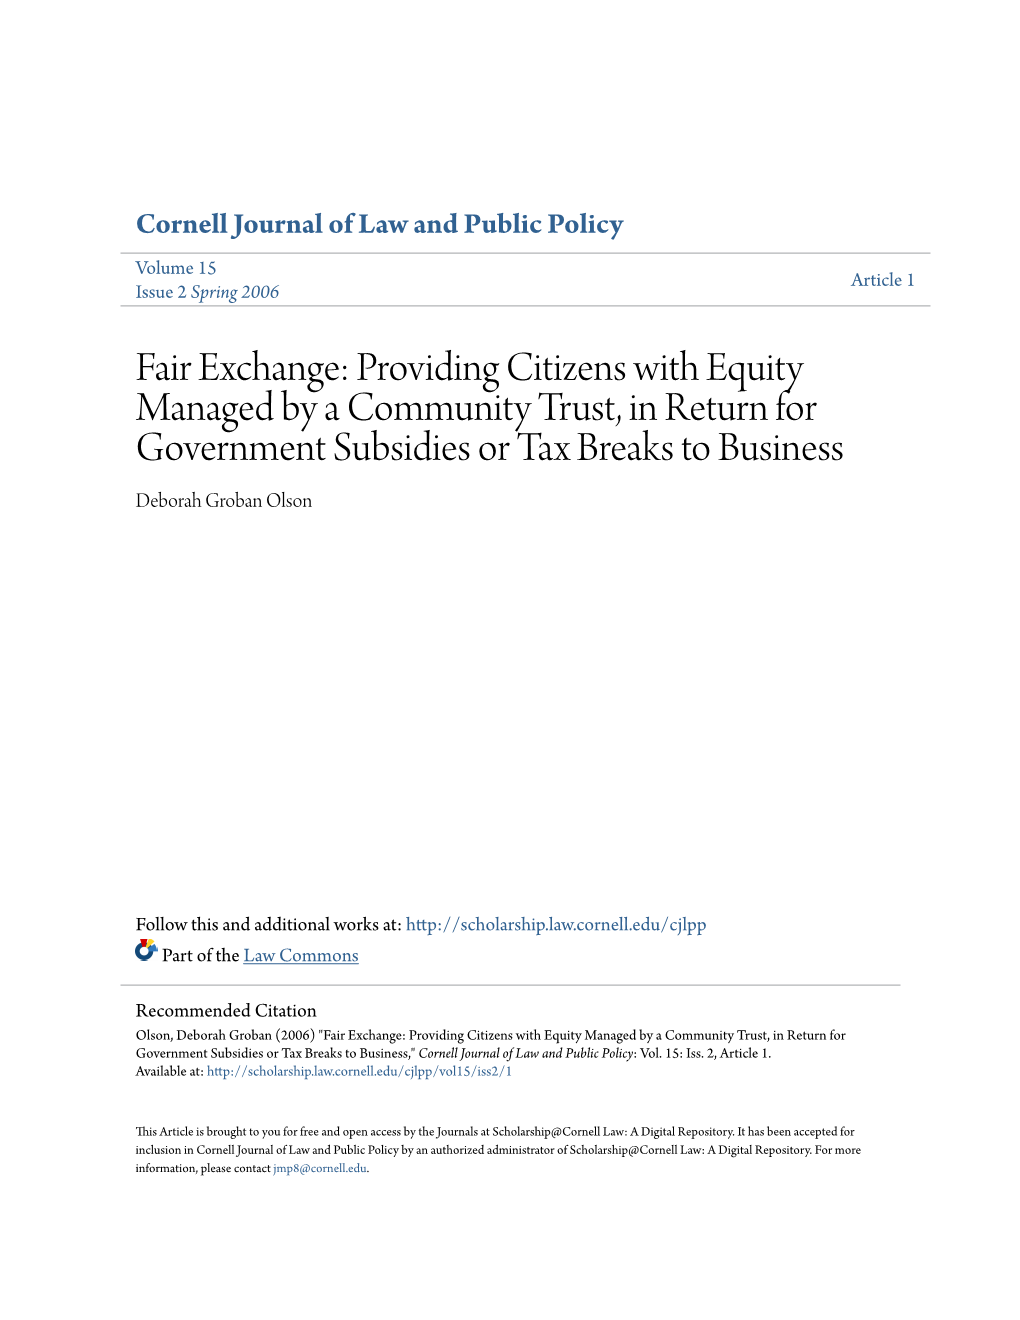 Fair Exchange: Providing Citizens with Equity Managed by a Community Trust, in Return for Government Subsidies Or Tax Breaks to Business Deborah Groban Olson